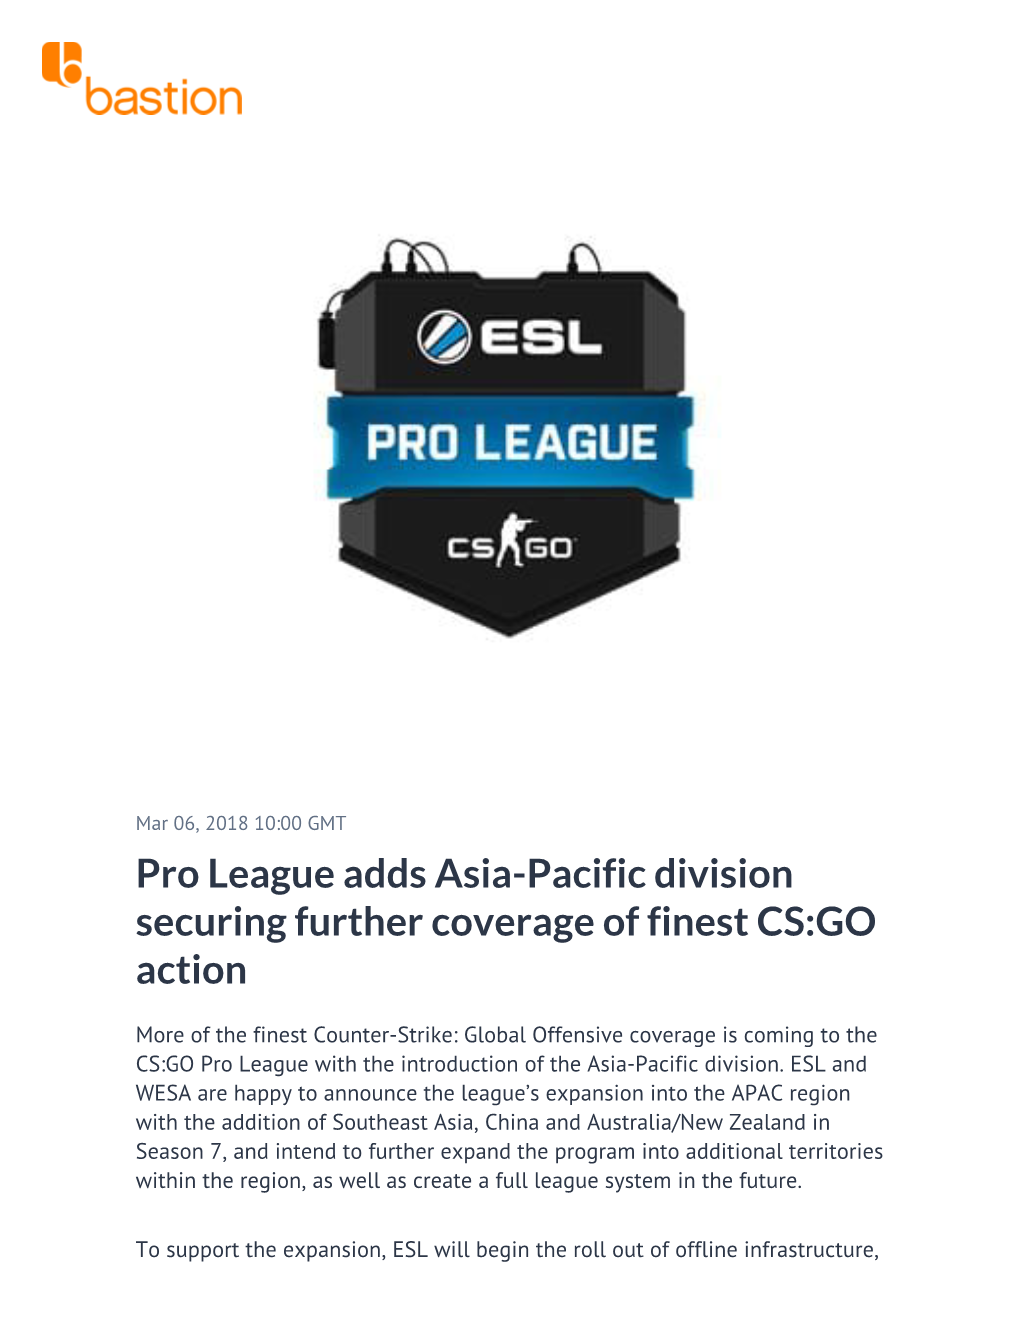 Pro League Adds Asia-Pacific Division Securing Further Coverage of Finest CS:GO Action